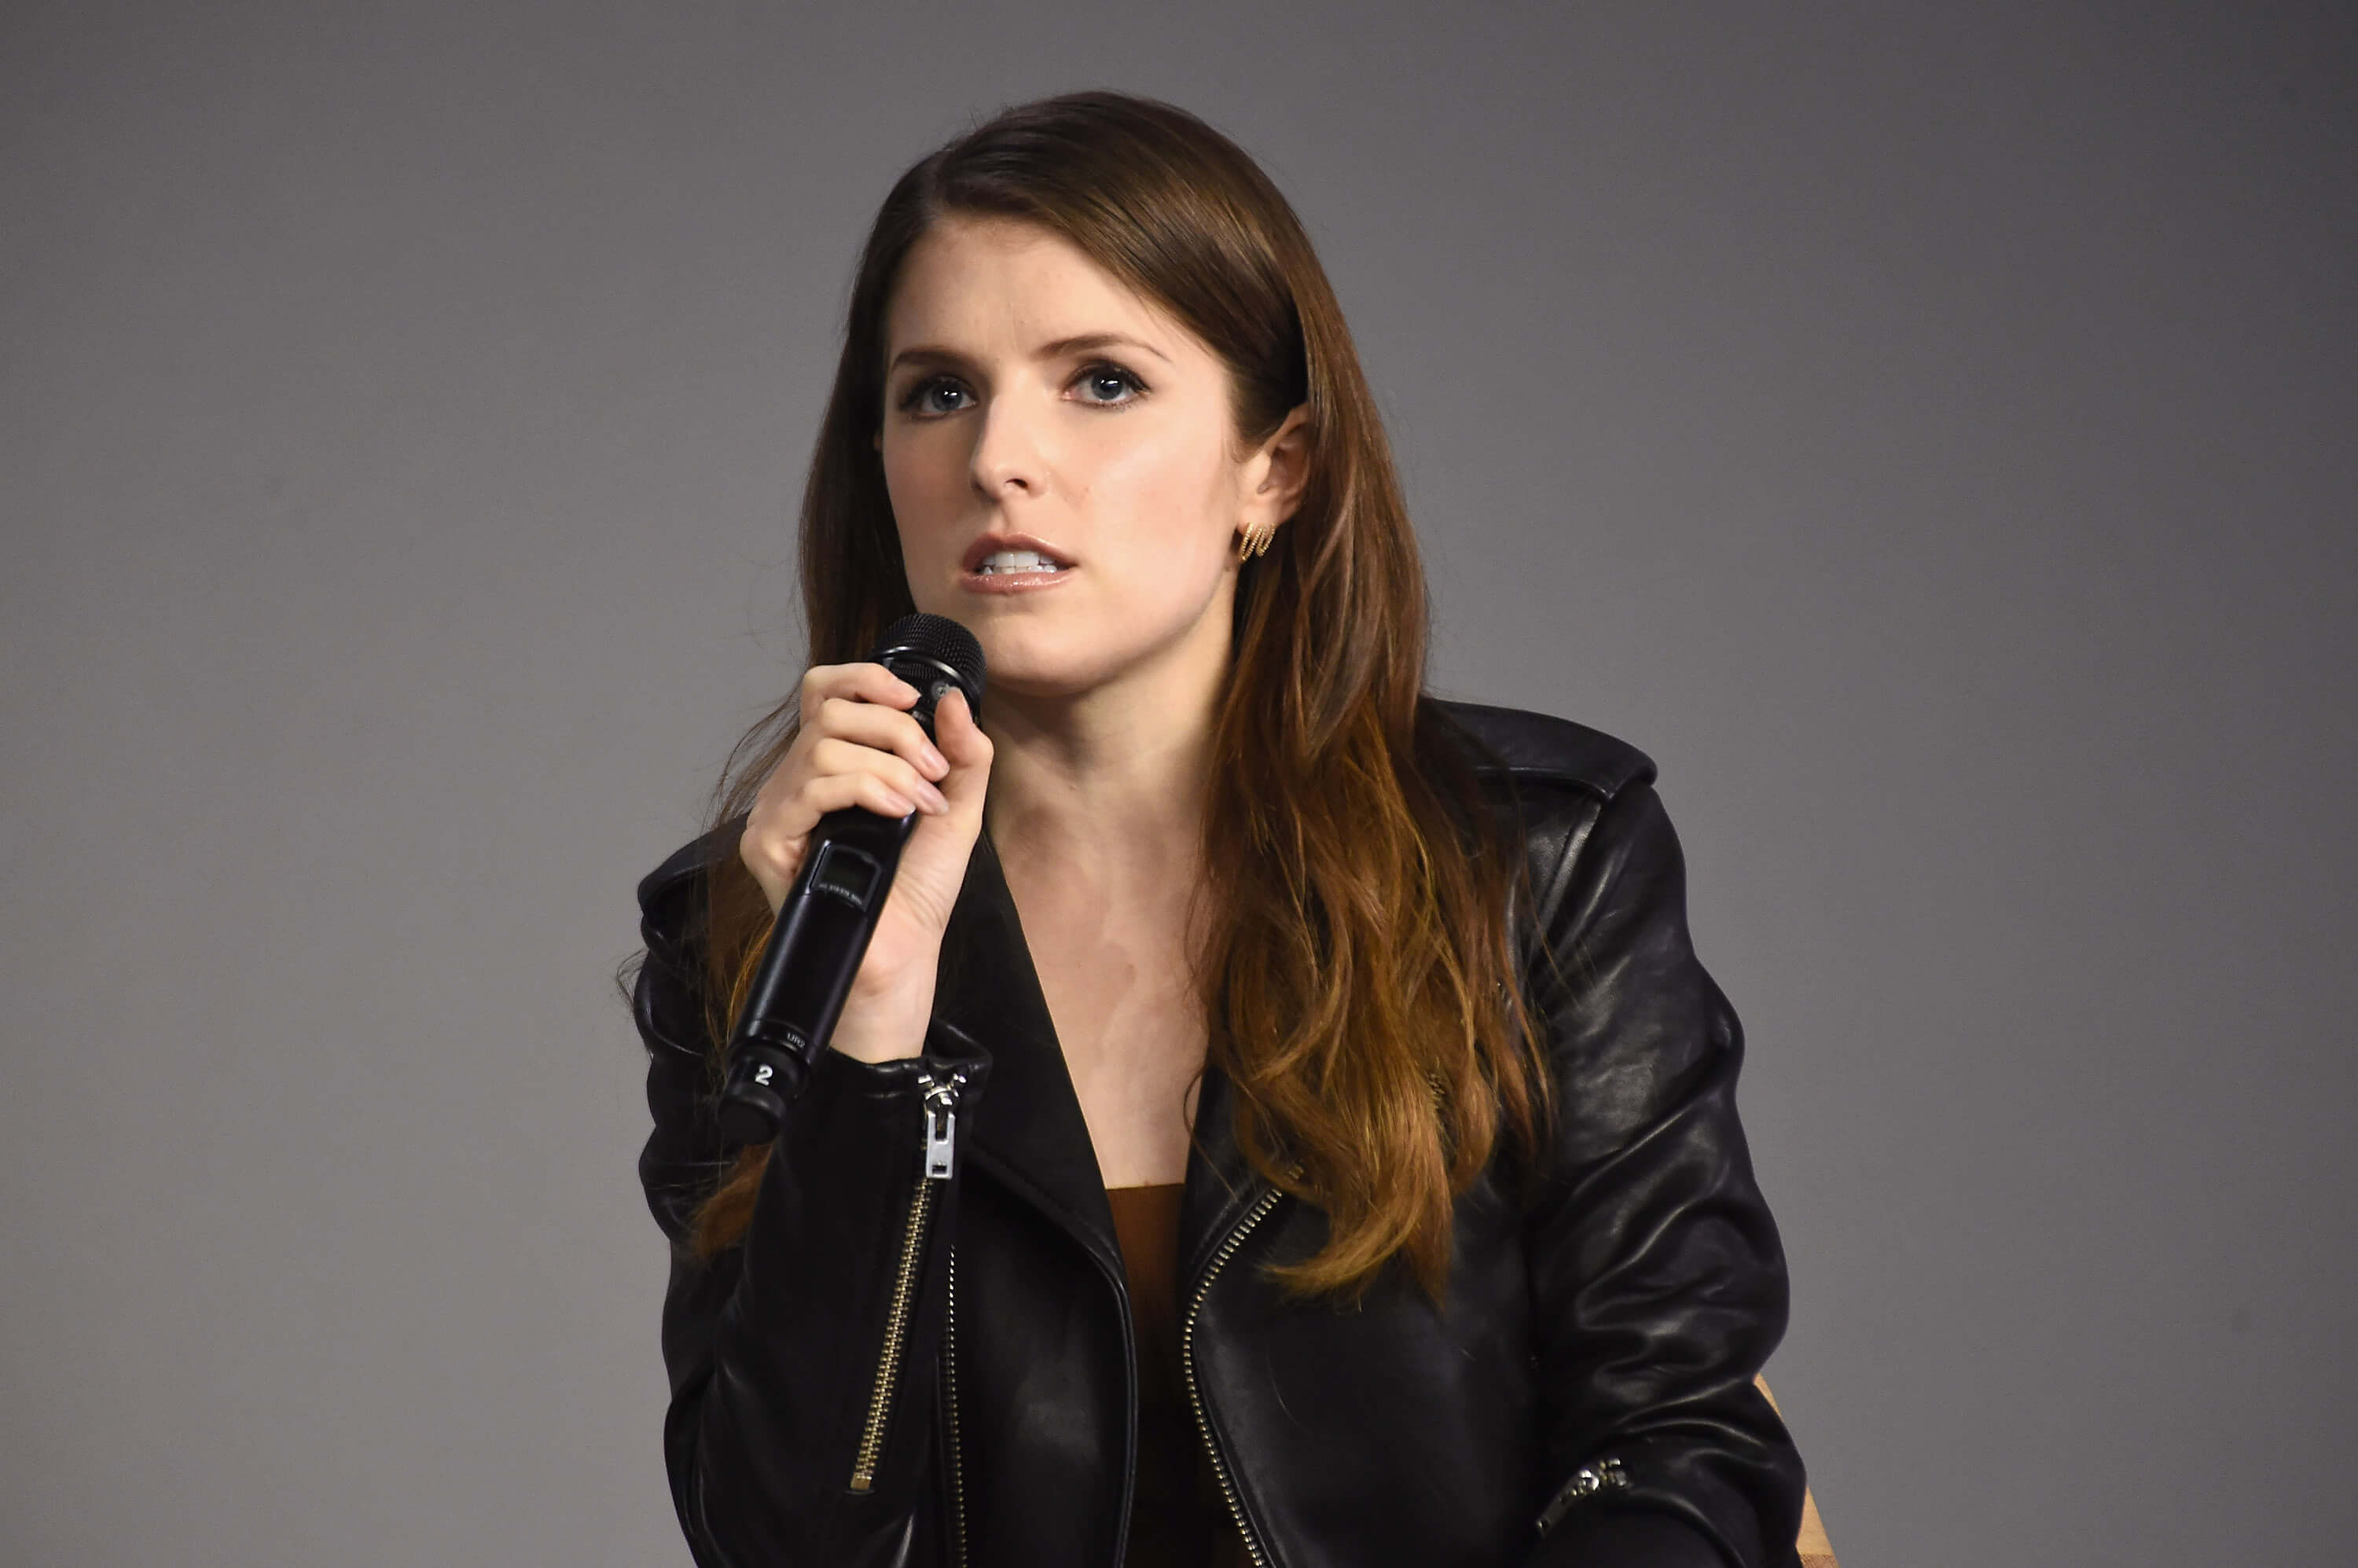 Anna Kendrick promoting Mike & Dave Need Wedding Dates